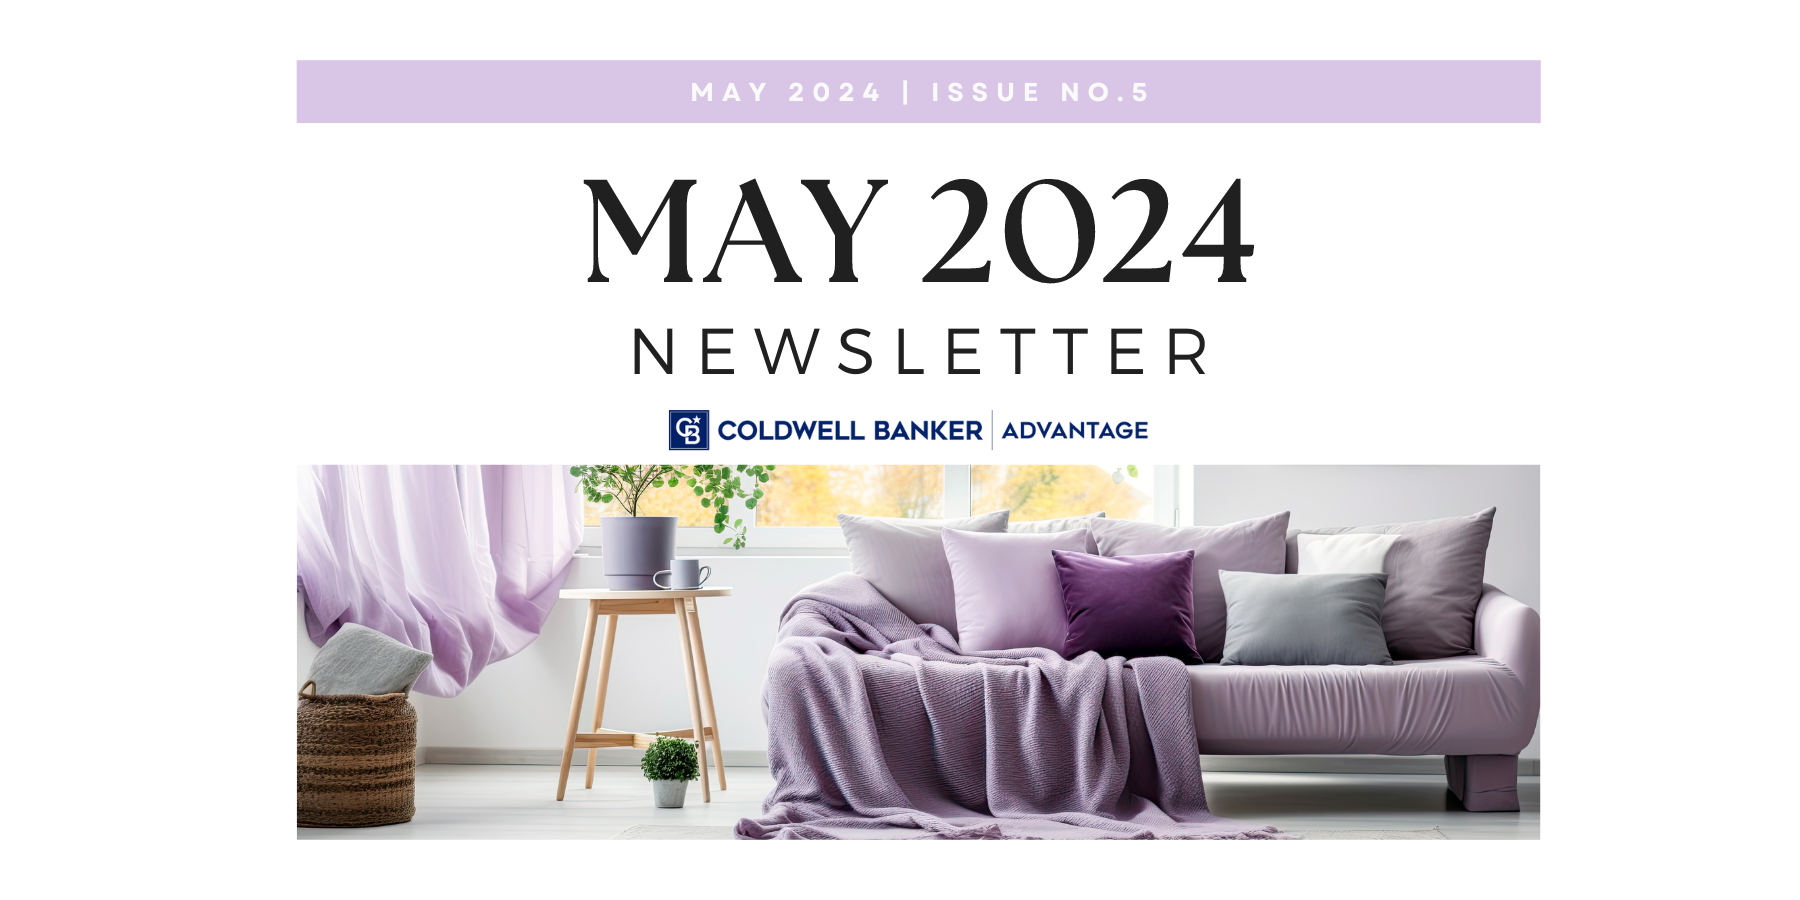 may 2024 | Issue No.5 may 2024 Newsletter